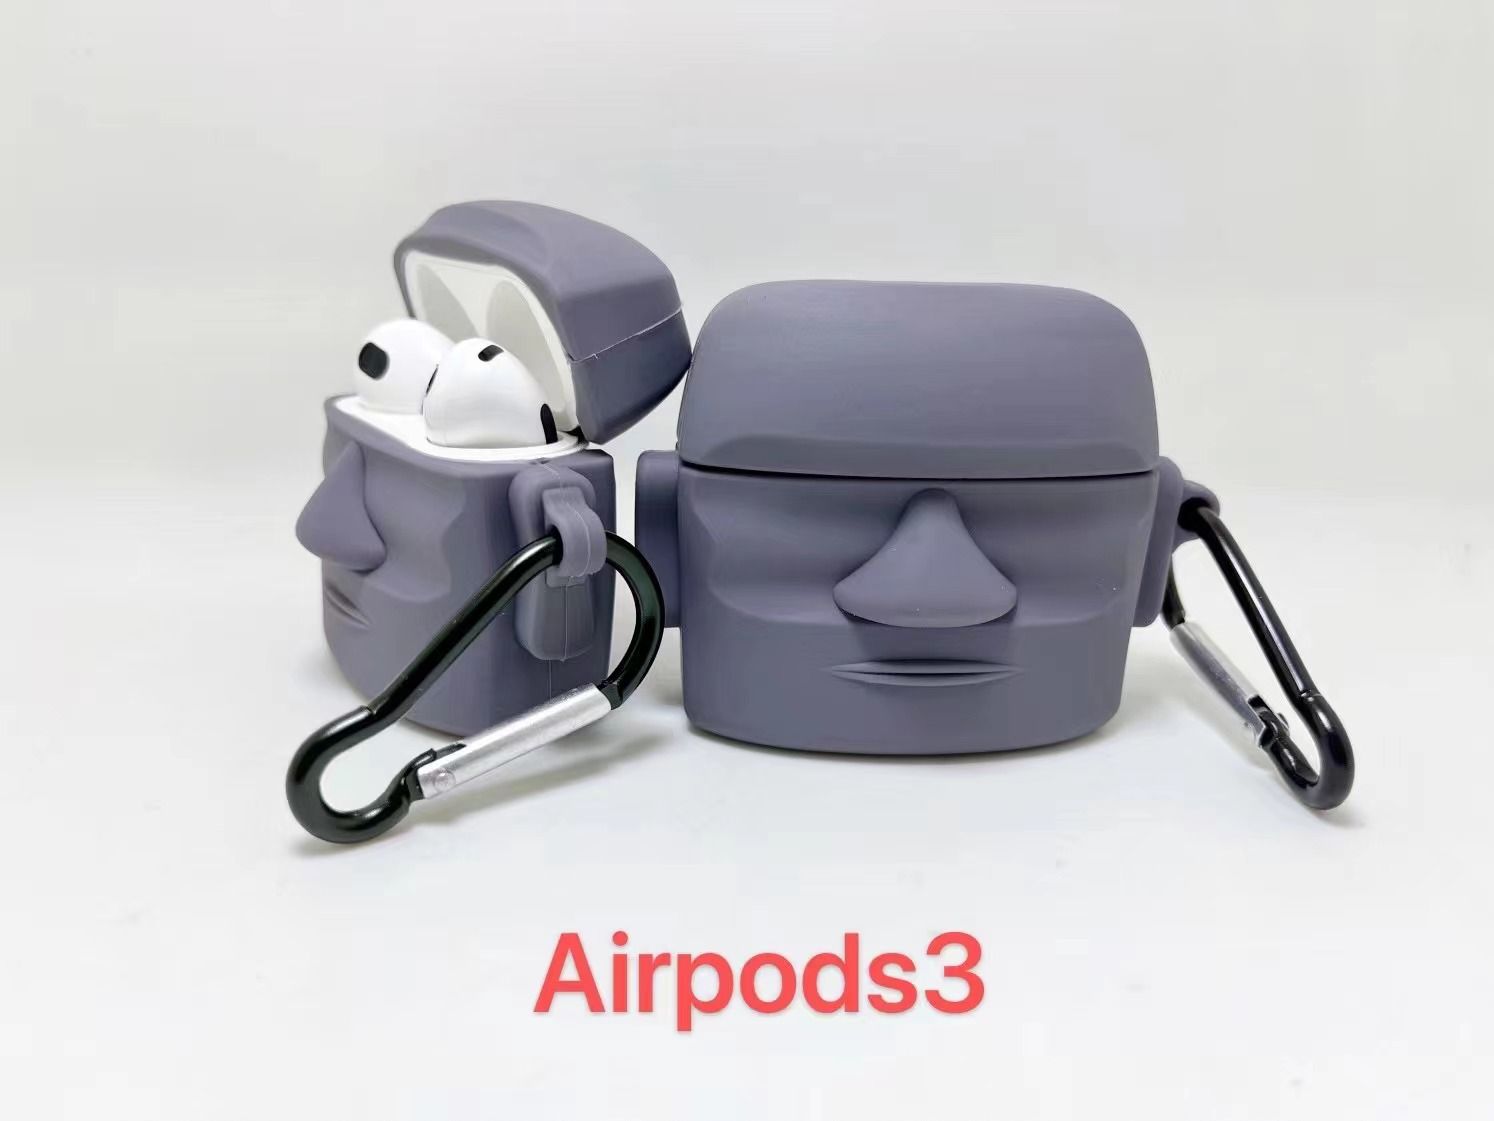 For airpos 3 2021